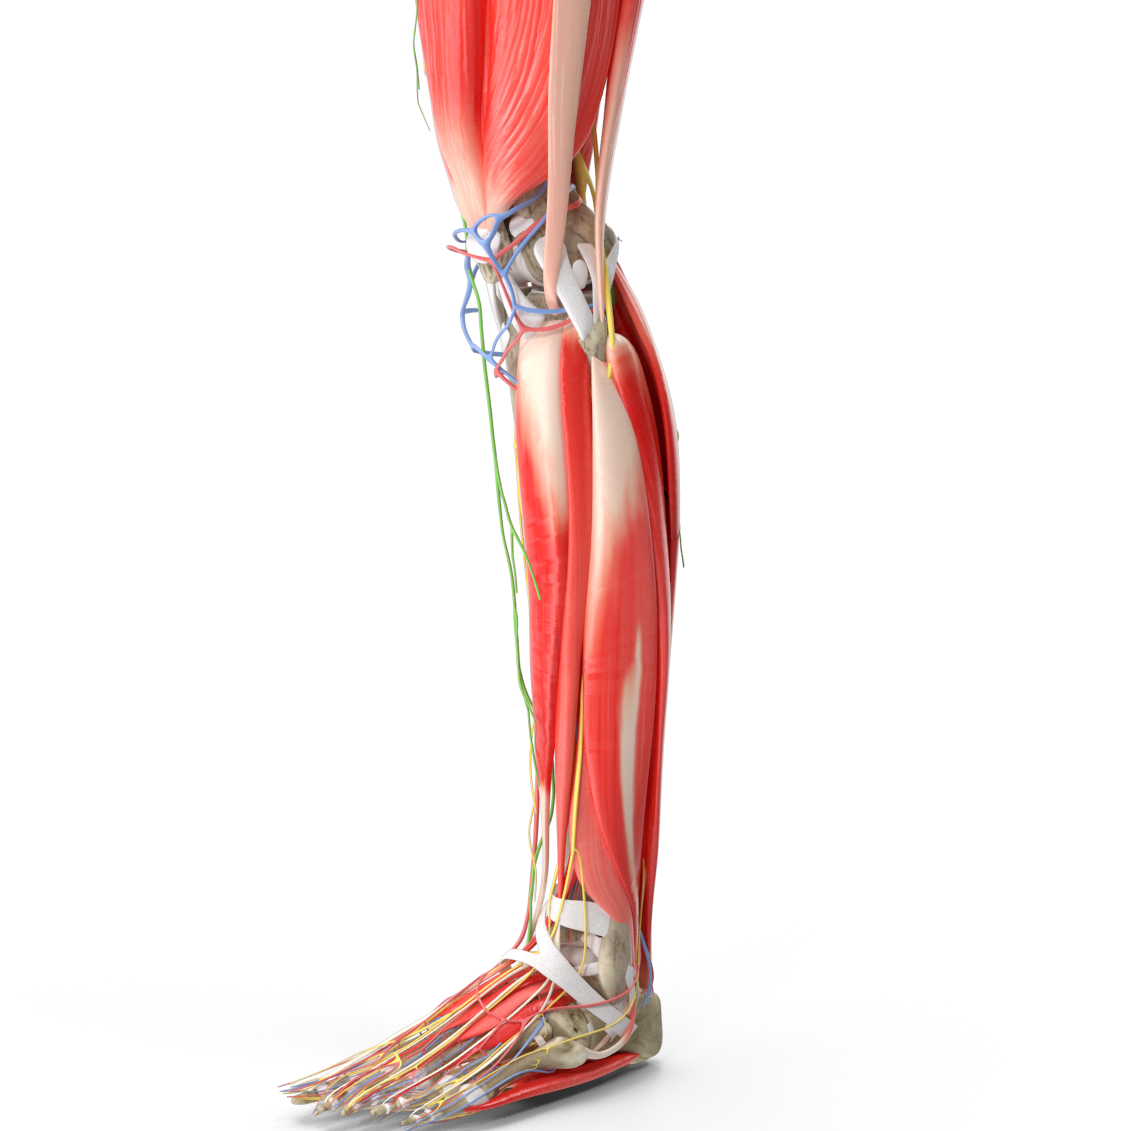 Top of the foot pain can be due to talar impingement. Anatomy showing muscles and talar bone a site where tendinitis occurs.